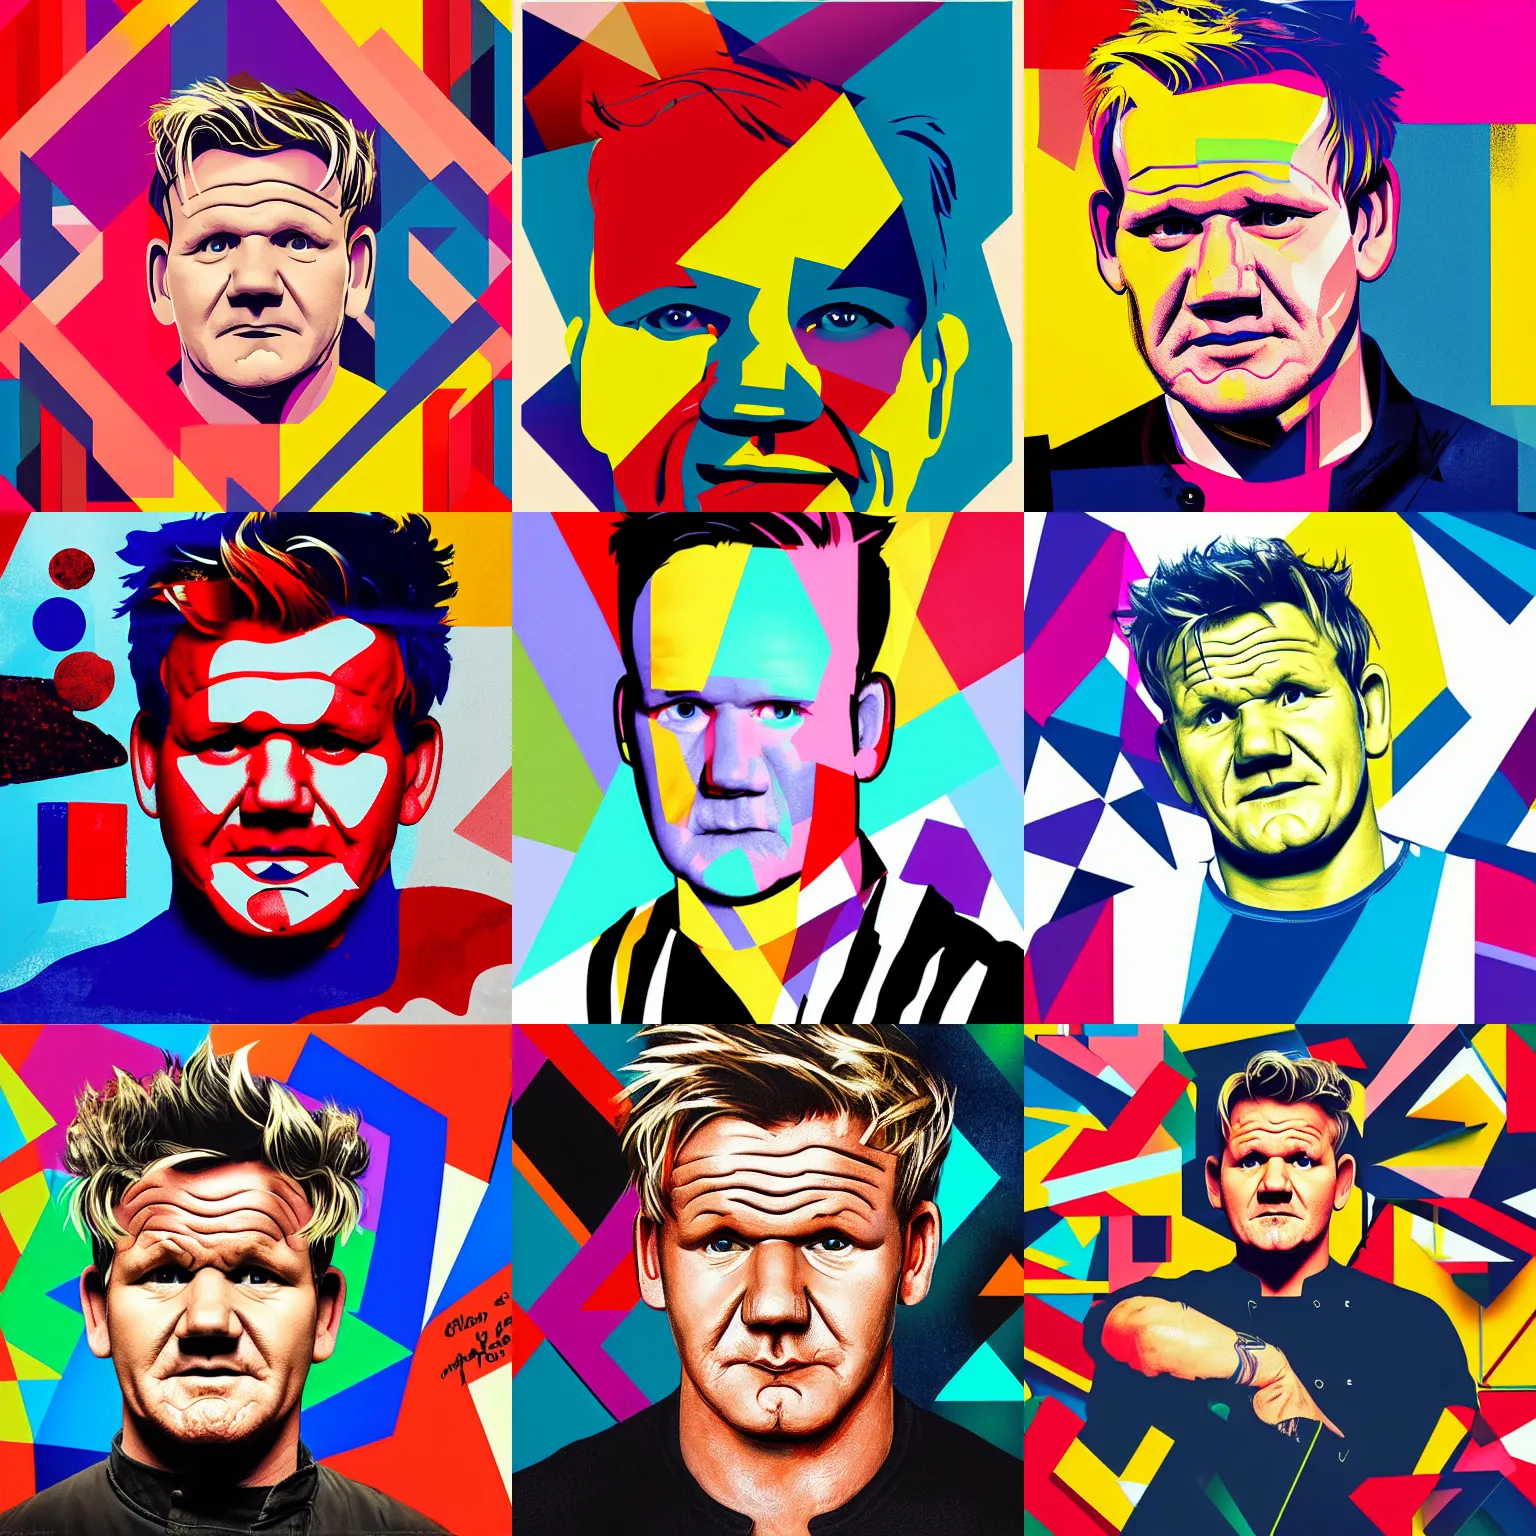 Prompt: A portrait of Gordon Ramsay, geometric shapes, rounded corners, candy colors, spray paint, bold graphics